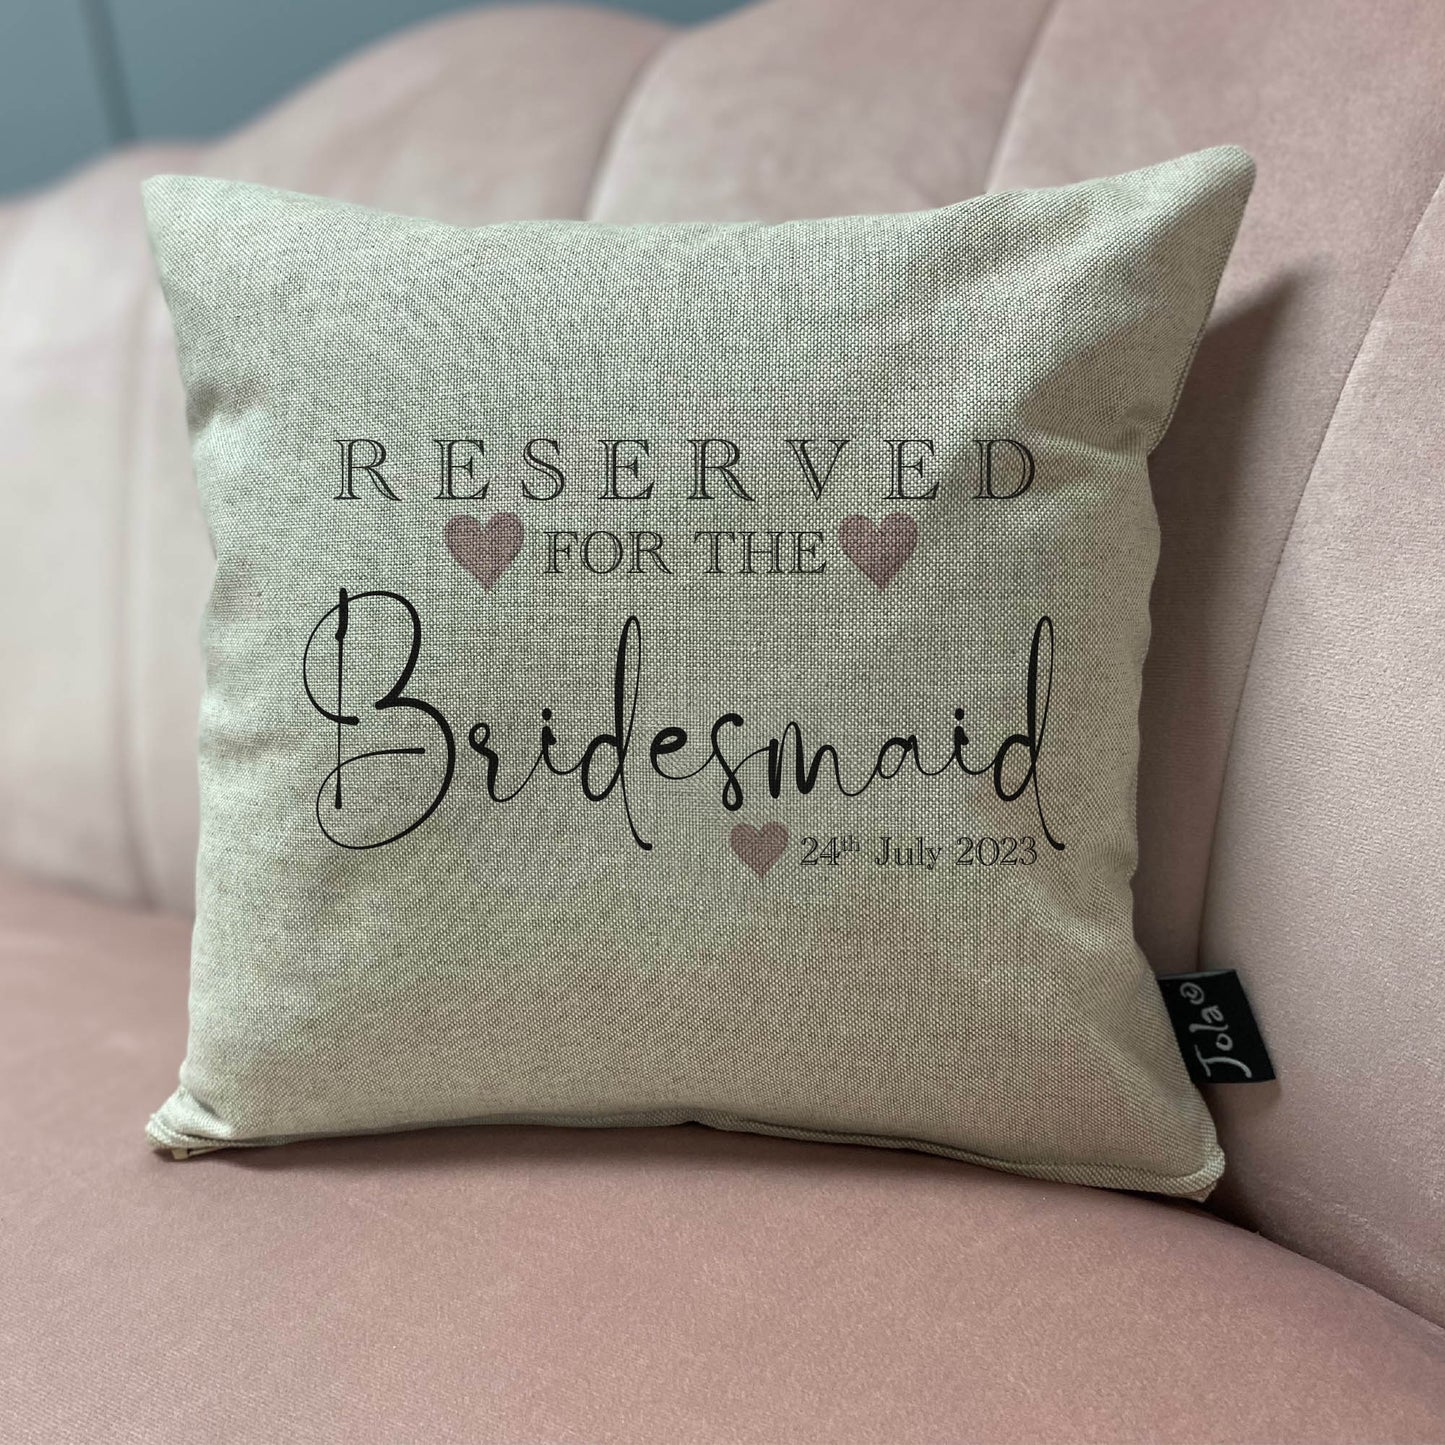 Reserved For the Bridesmaid cushion - Jola Designs